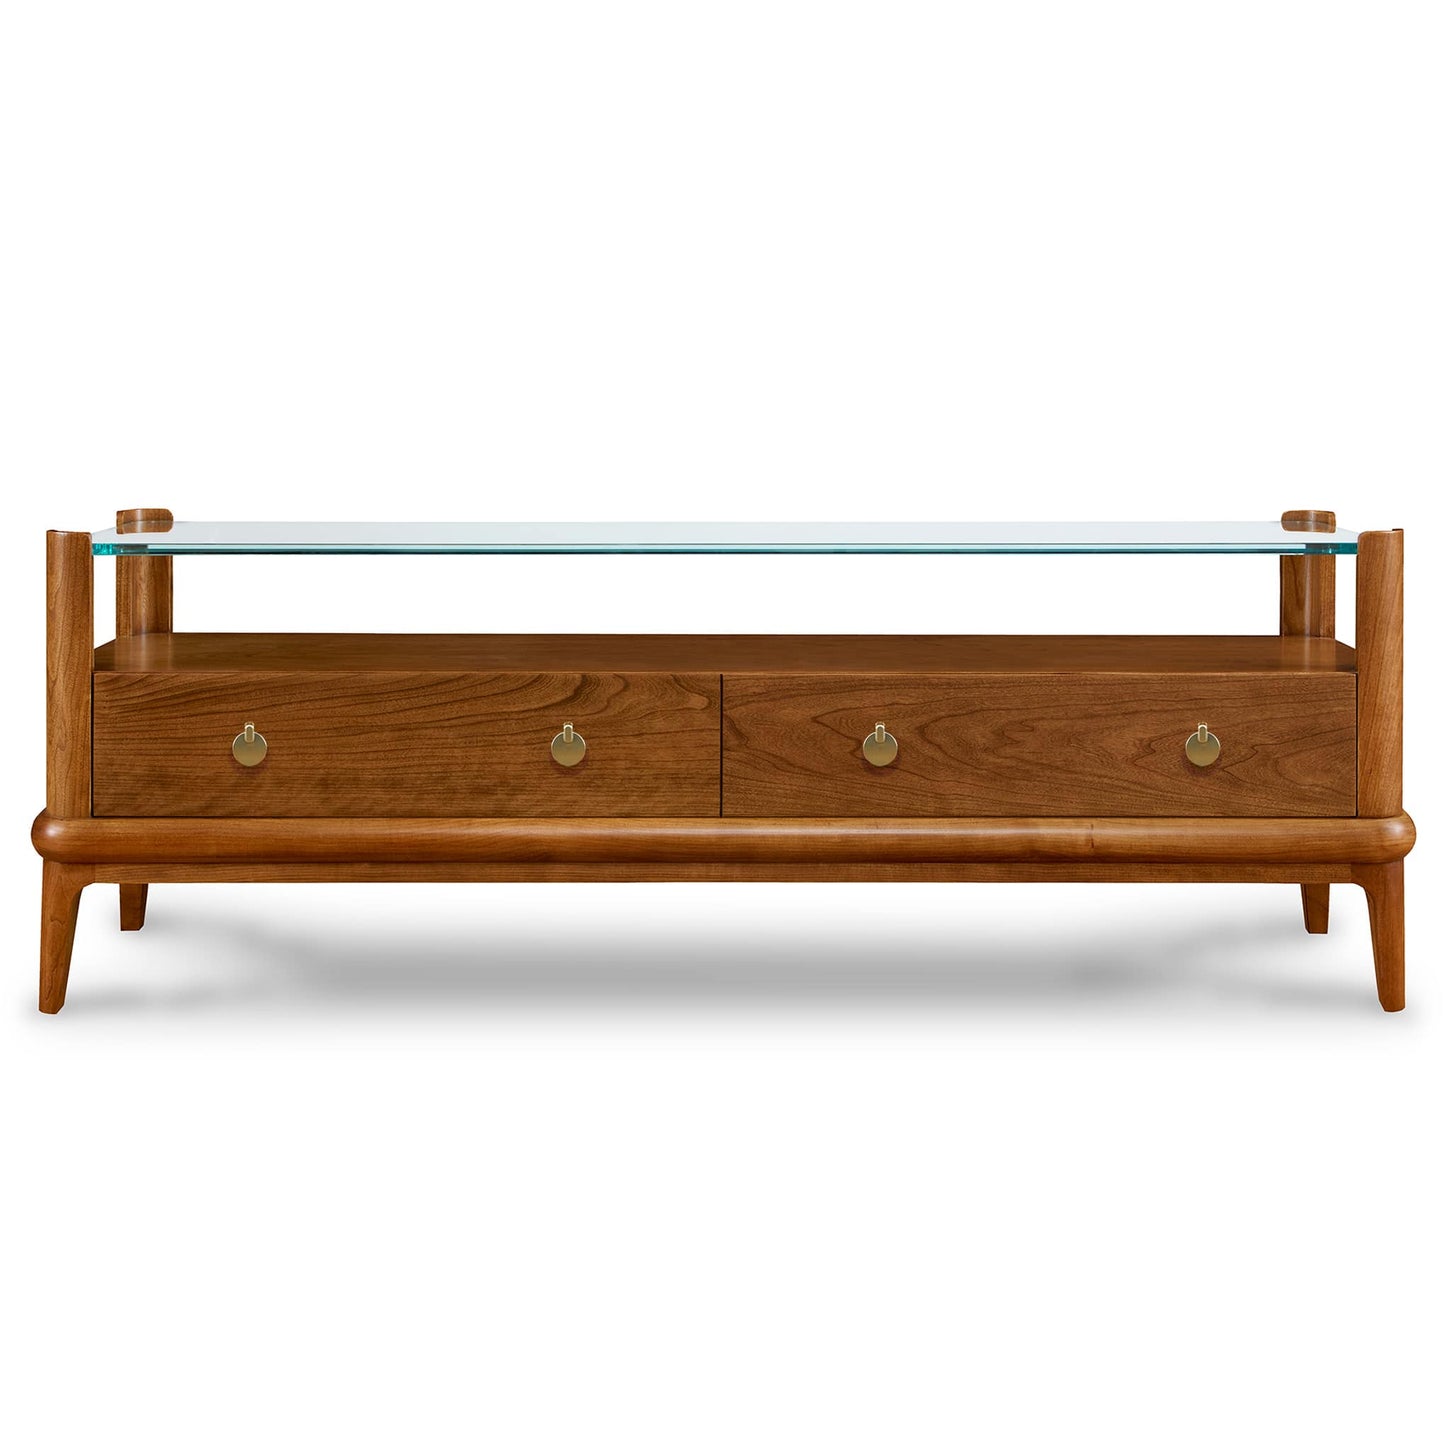 Martine Glass-Top Cocktail Table - Stickley Brand